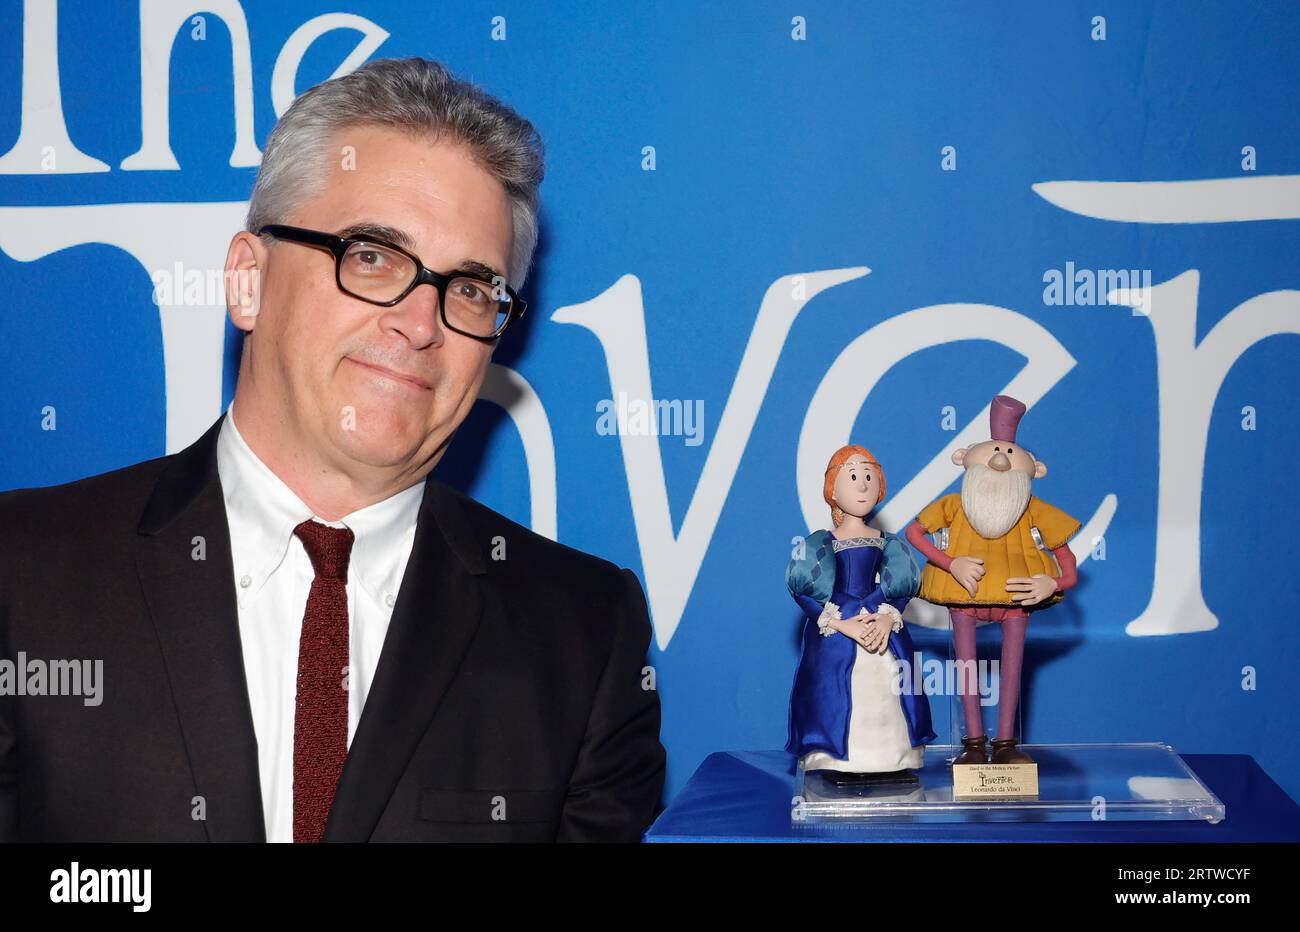 Los Angeles, Ca. 14th Sep, 2023. Jim Capobianco at the US Premiere Of 'The Inventor' at Hollywood American Legion in Los Angeles, California on September 14, 2023. Credit: Faye Sadou/Media Punch/Alamy Live News Stock Photo